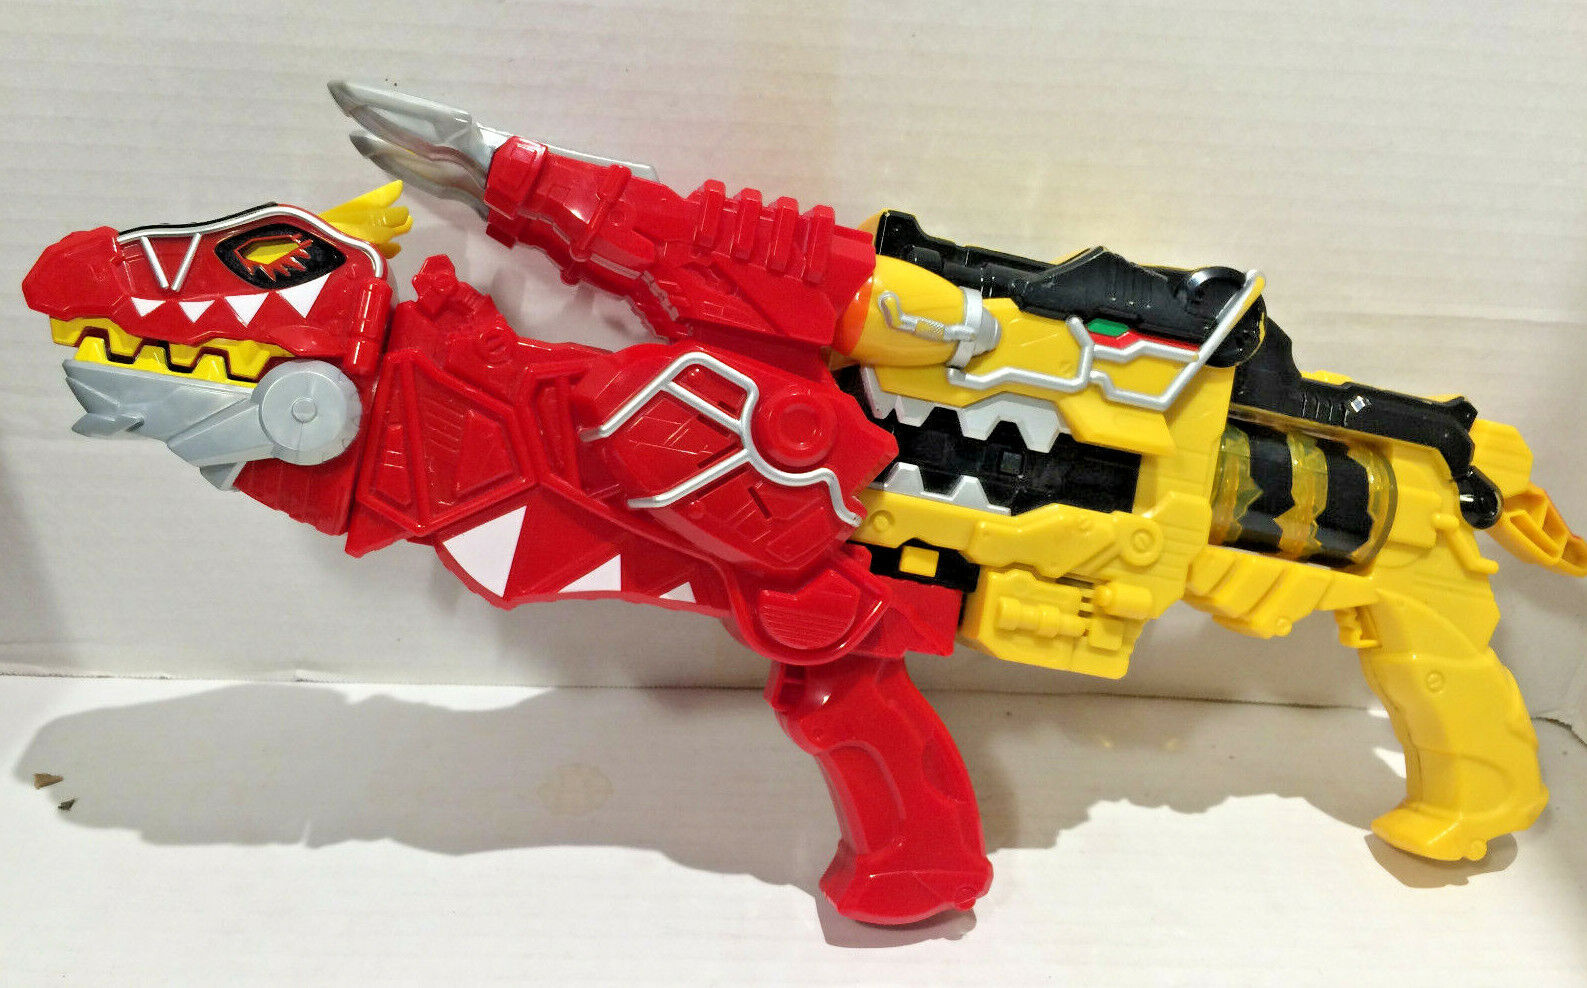 Awesome 2001 Power Rangers Dino Super Charge Yellow/Red T-Rex Morpher Blasters